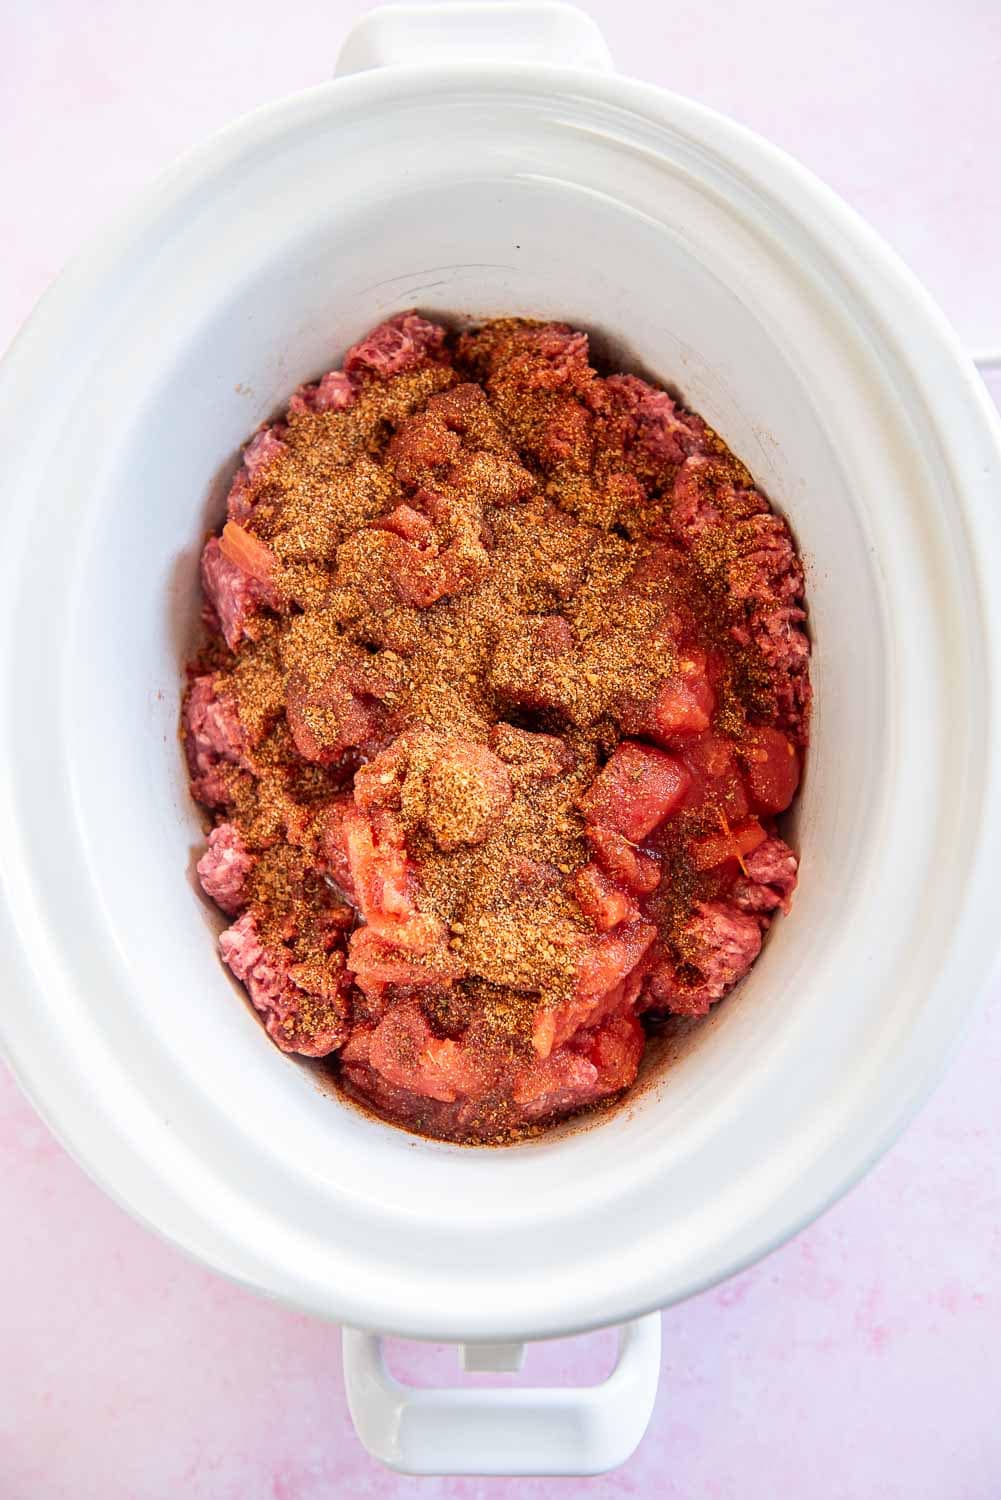 raw ground beef with seasonings and red cause inside of a white slow cooker